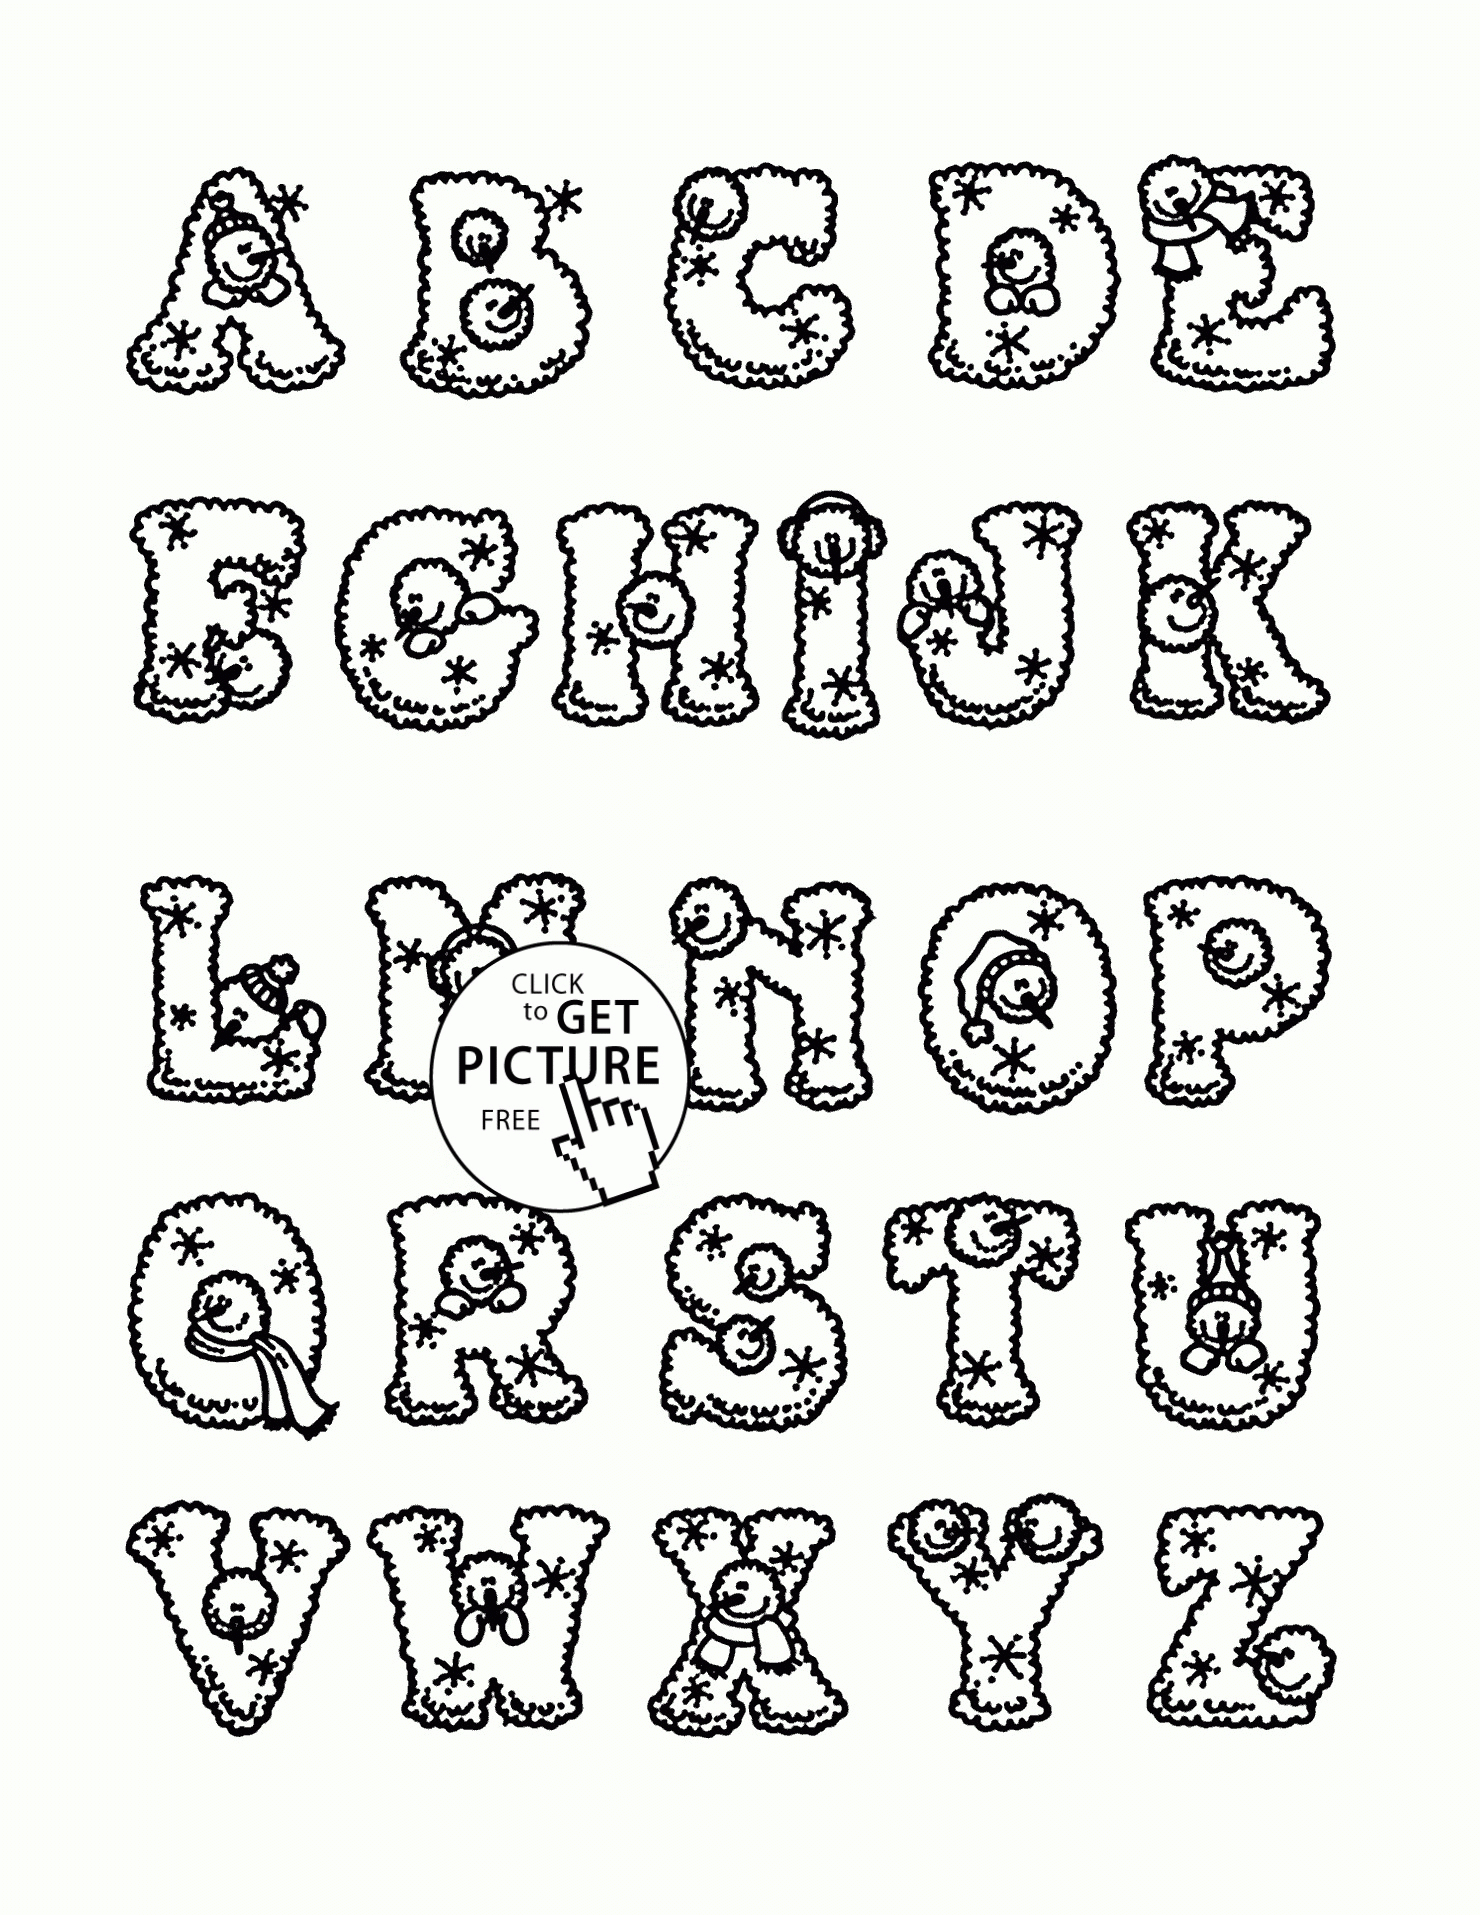 Coloring ~ Alphabet Coloring Book Printable Free Pages Pdf with Alphabet Coloring Worksheets Pdf